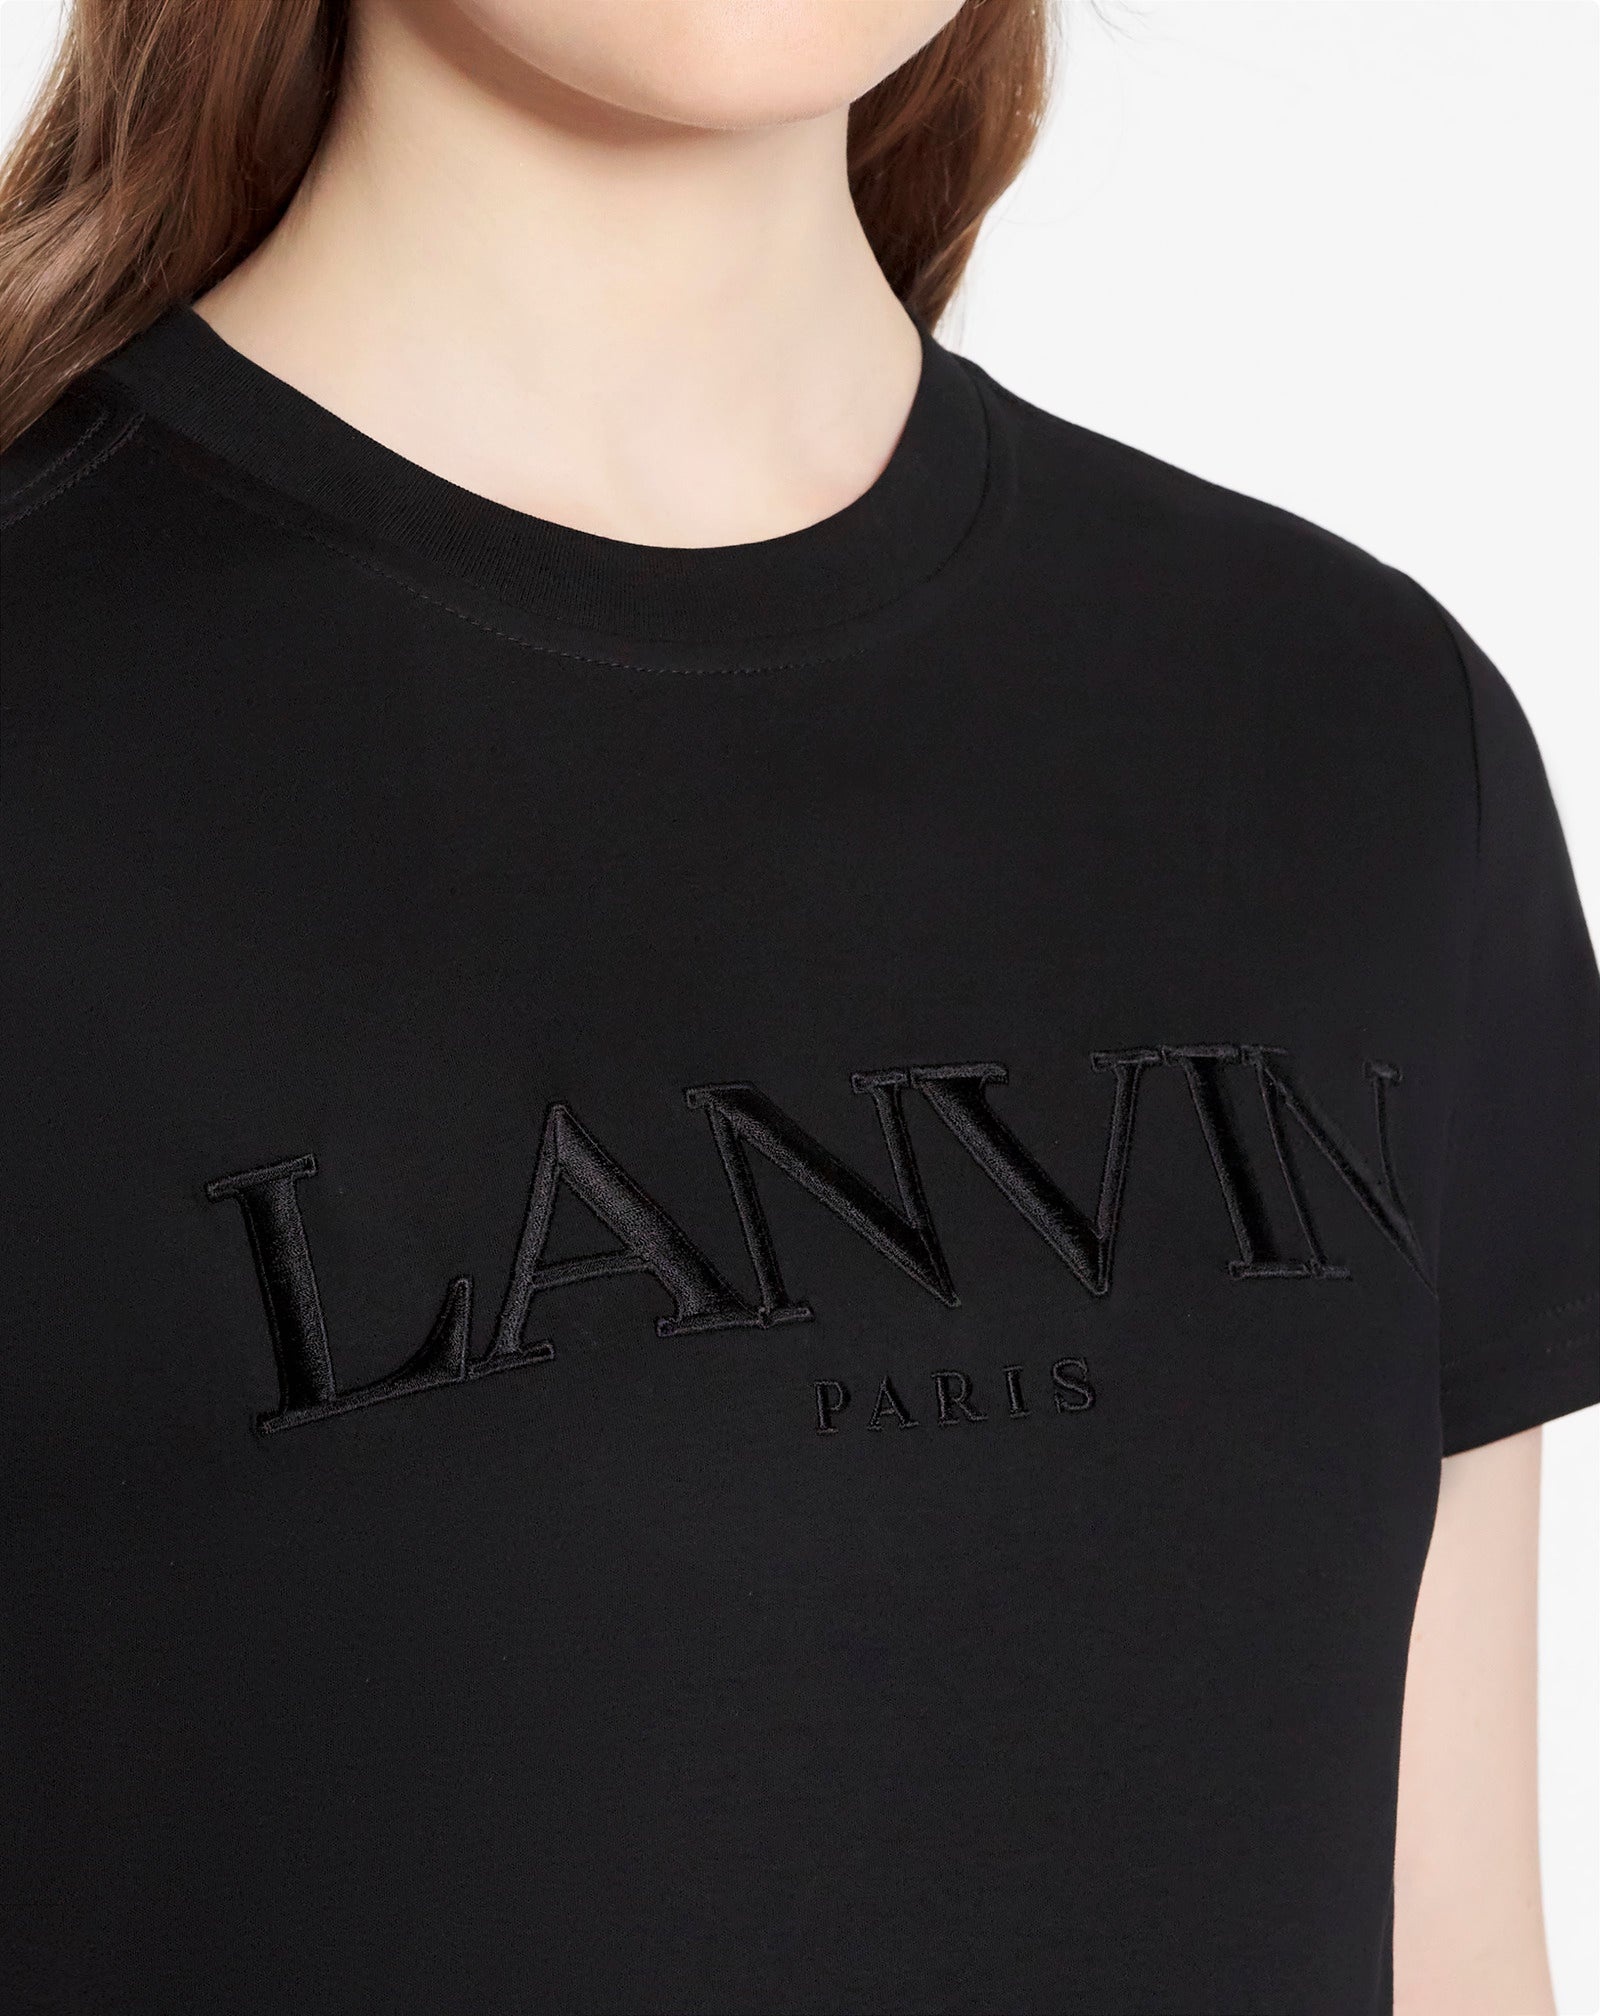 CLASSIC FIT LANVIN EMBROIDERED T-SHIRT - 5